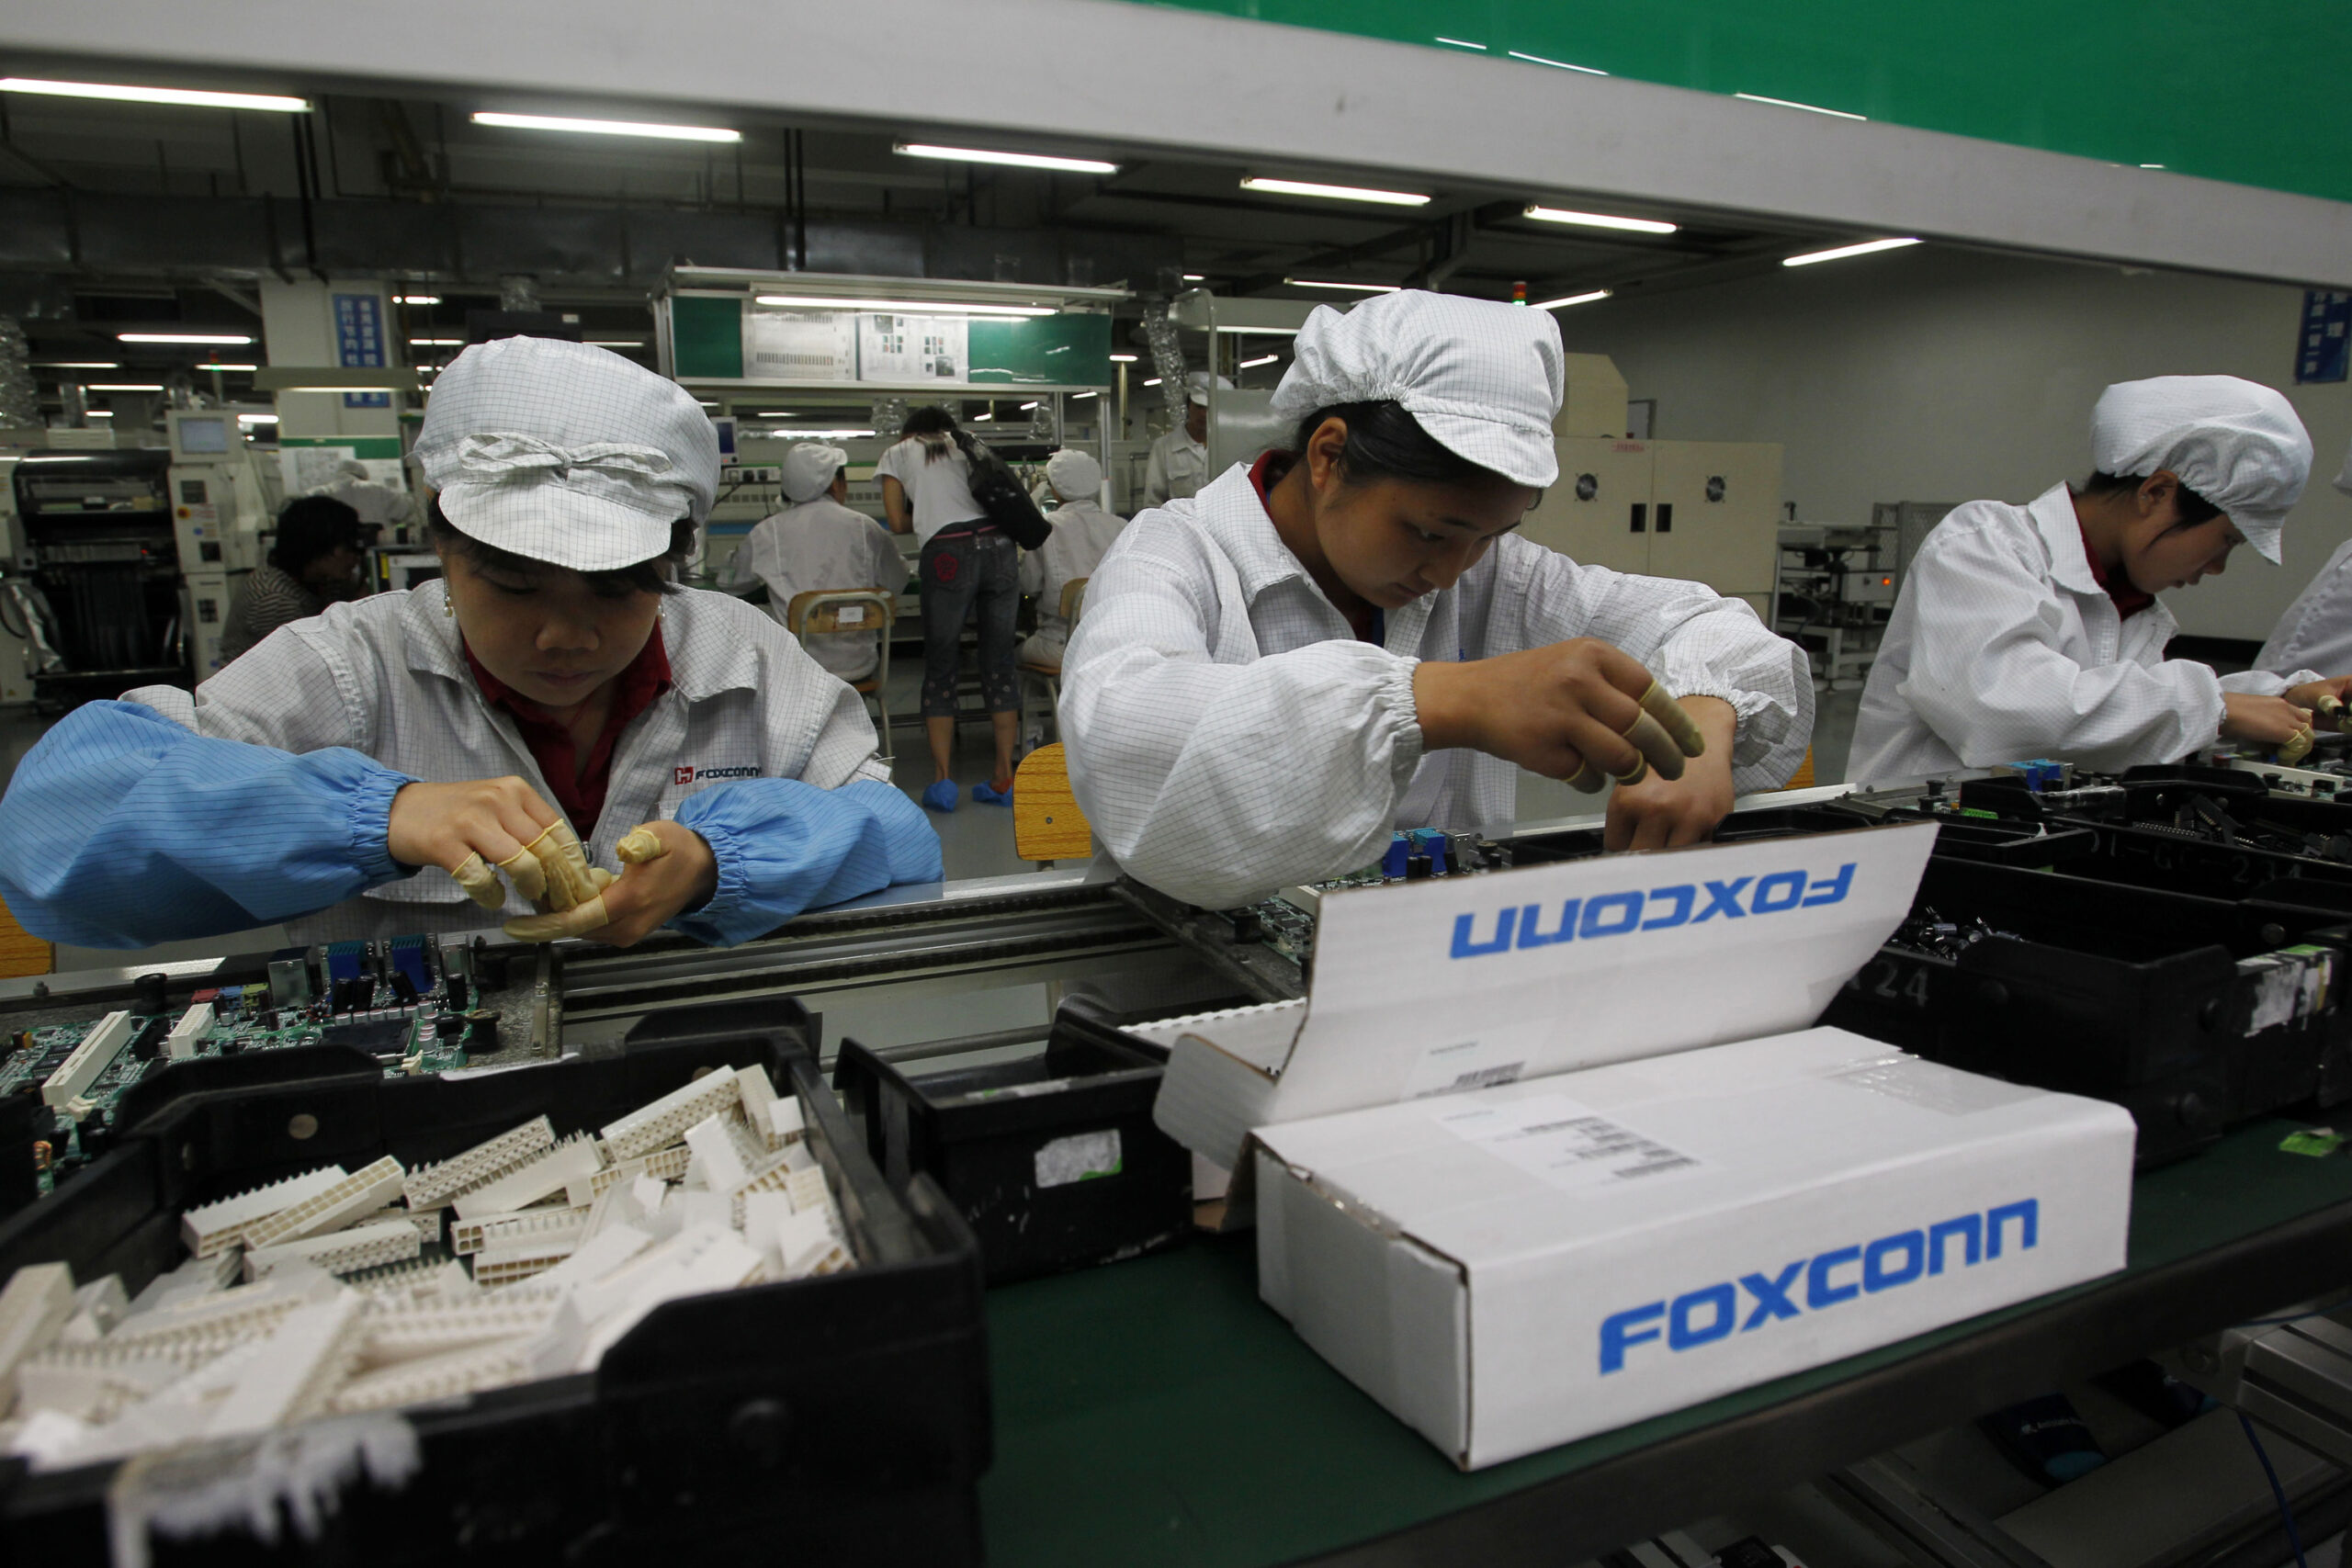 Employees work on the production line at the Foxconn complex in the southern Chinese city of Shenzhen, southern China